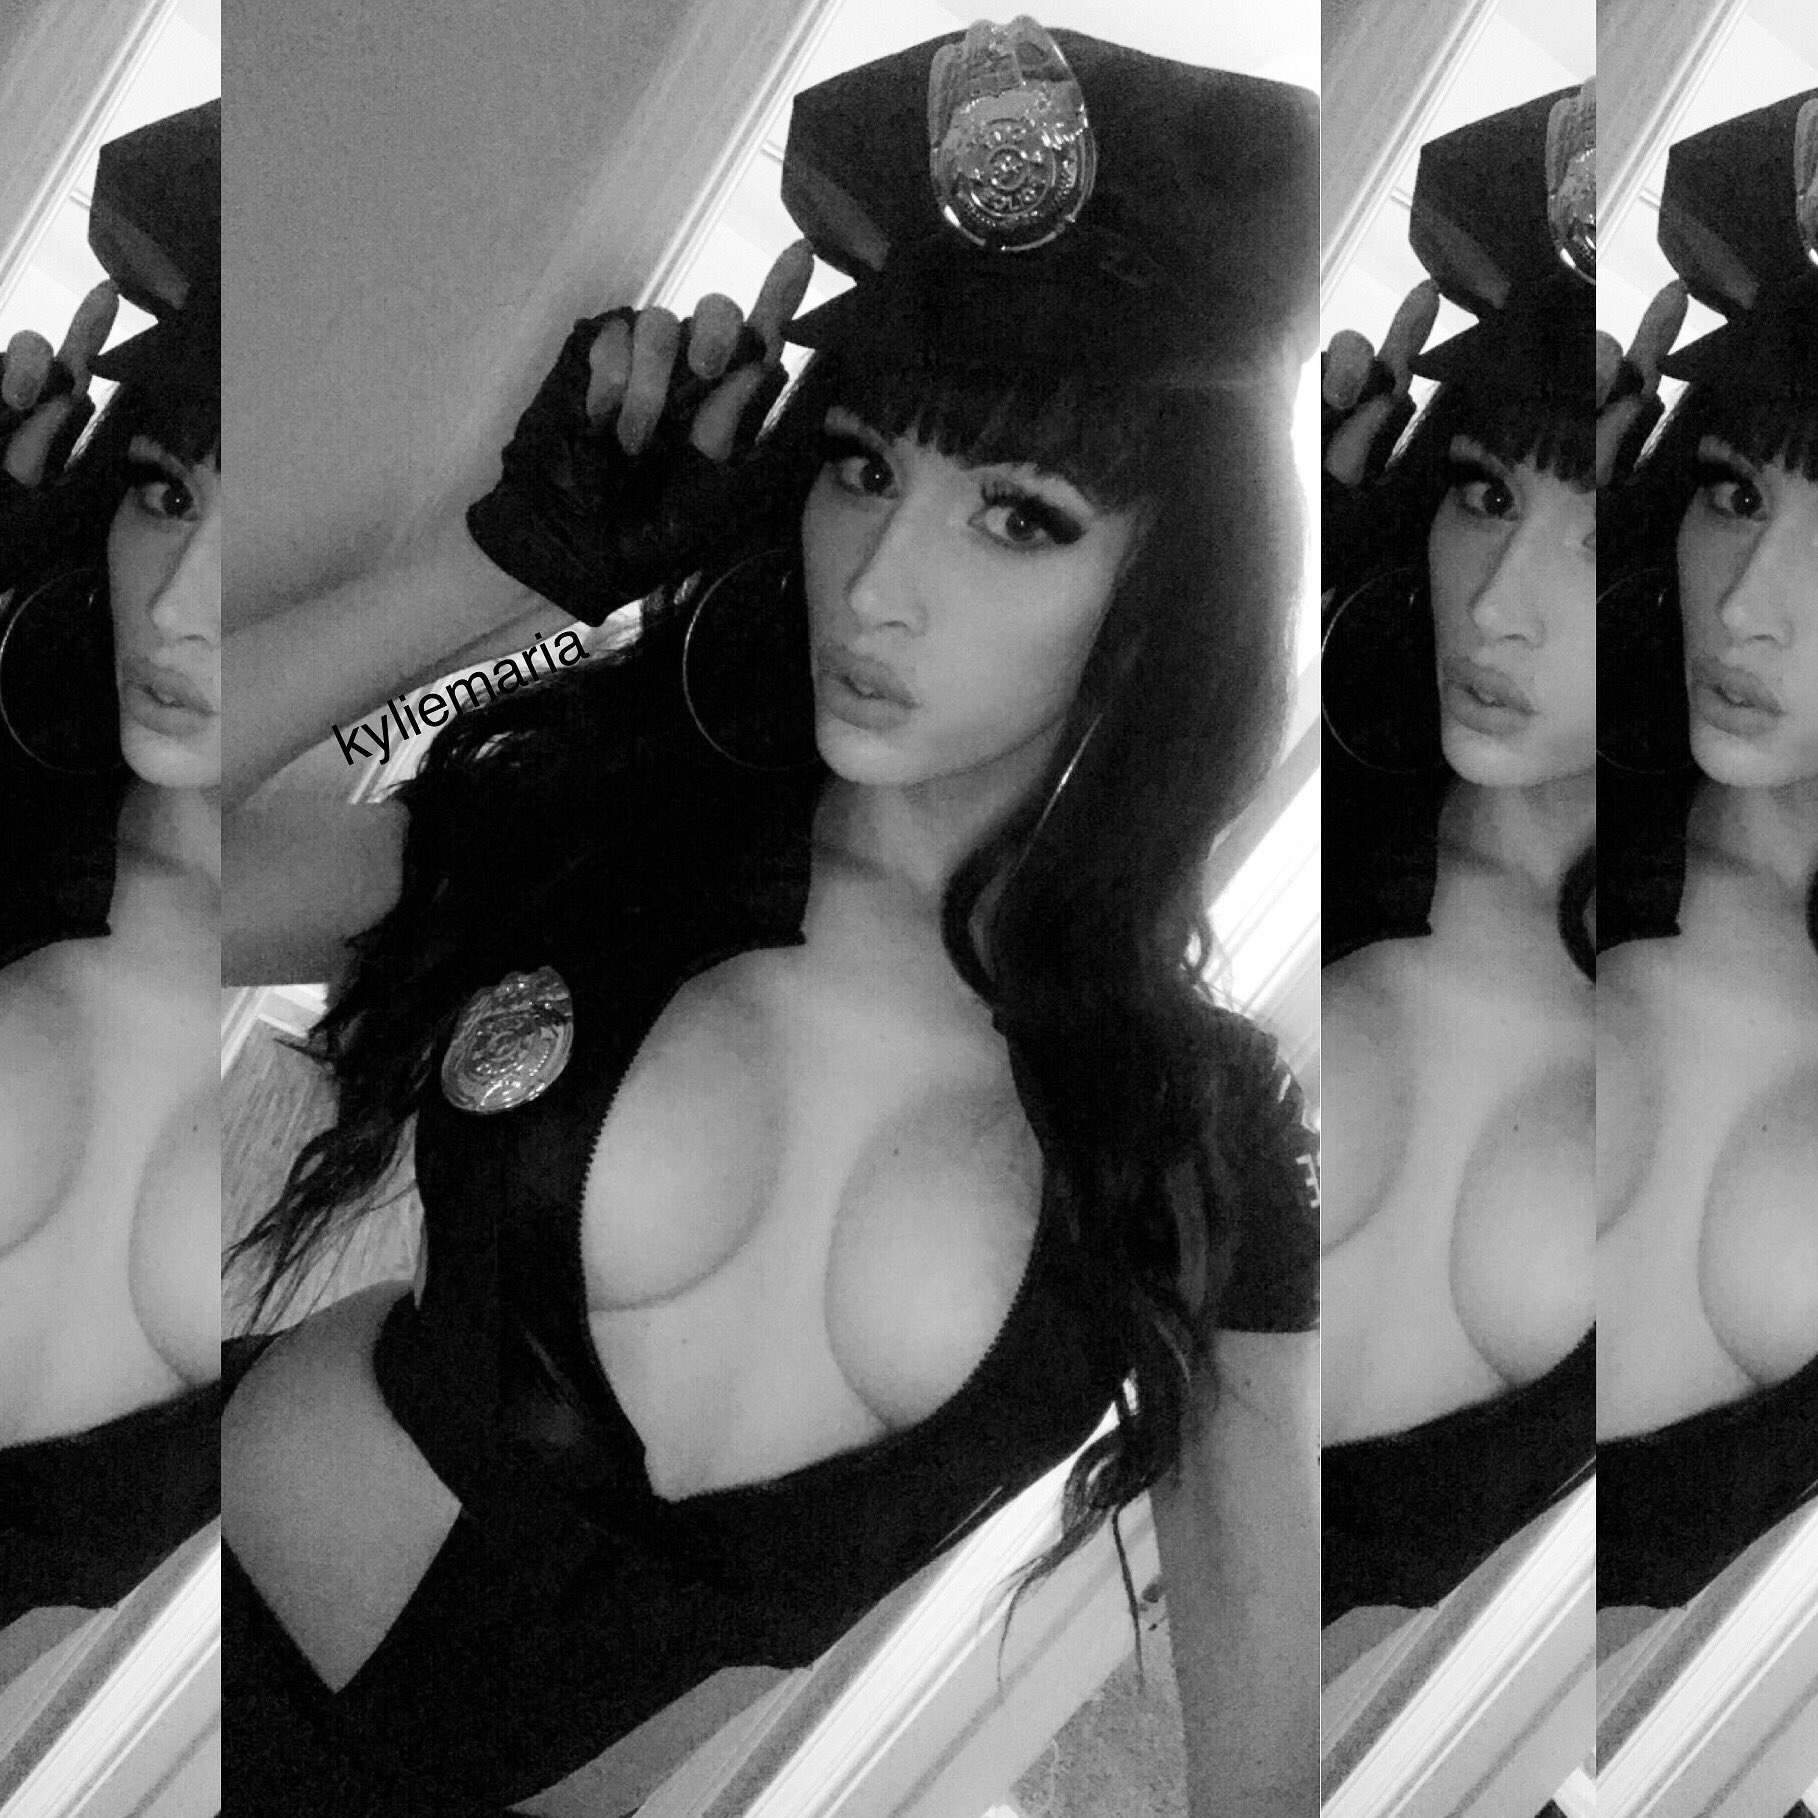 watcha gon do when Kylie cums for u 🖤🚔 https://t.co/o2DKpl1aRk